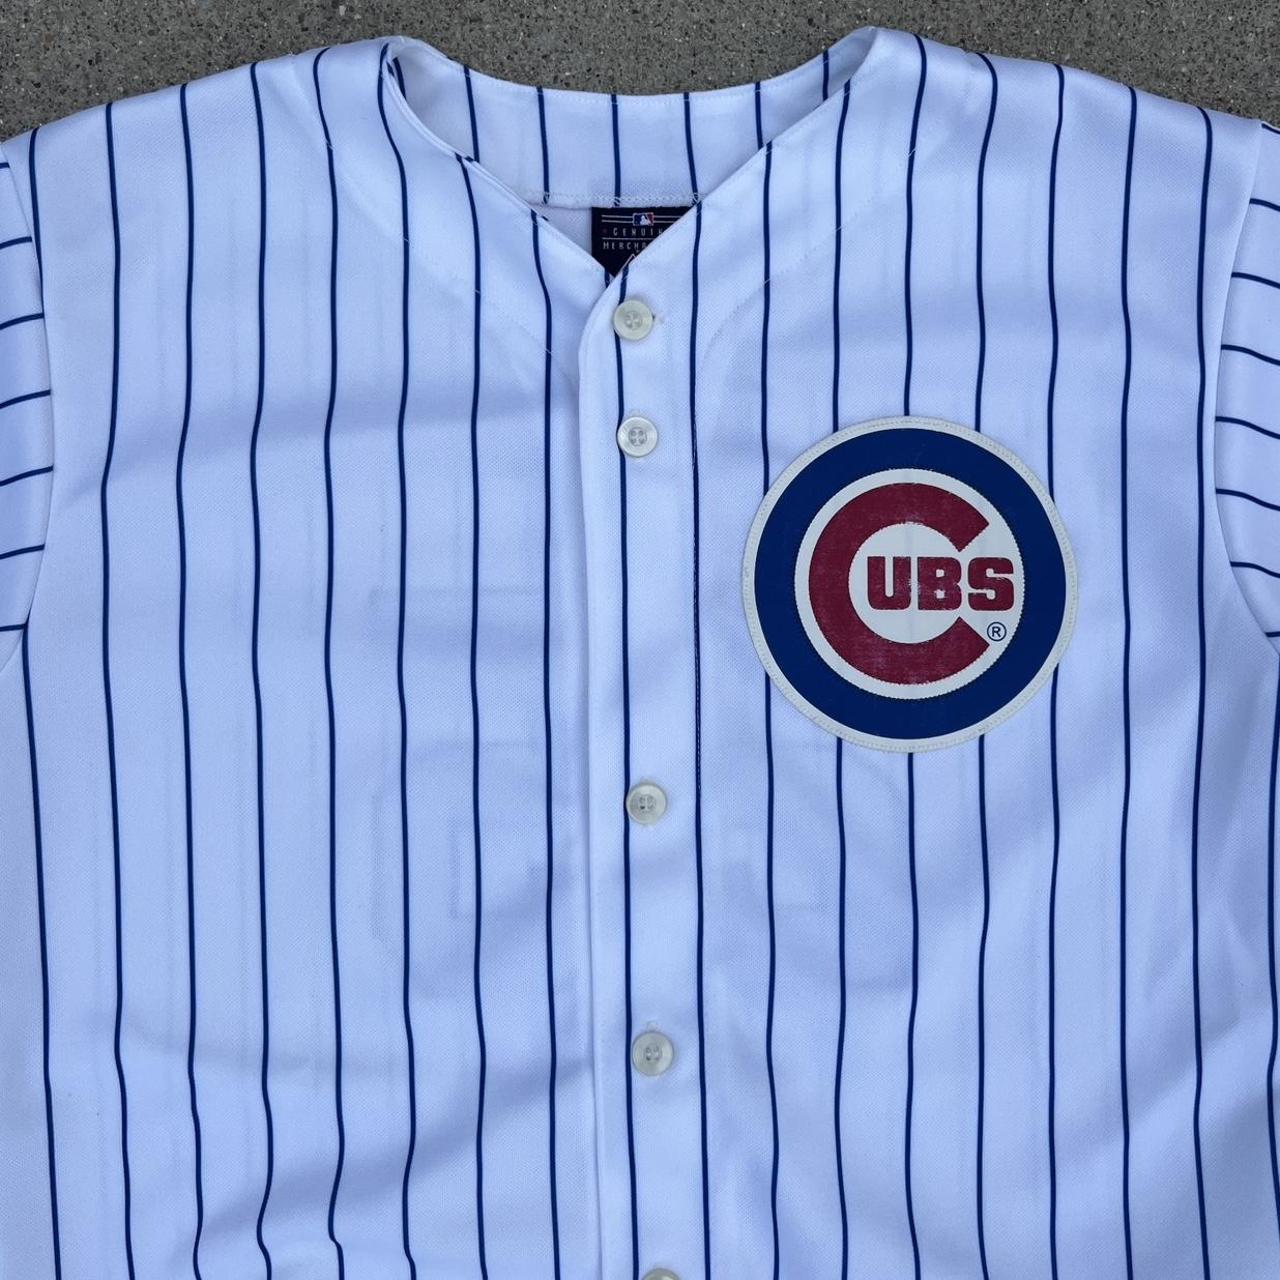 Baseball Jersey – Chicago Cubs – Lee #25 – Mlb – Pin Striped